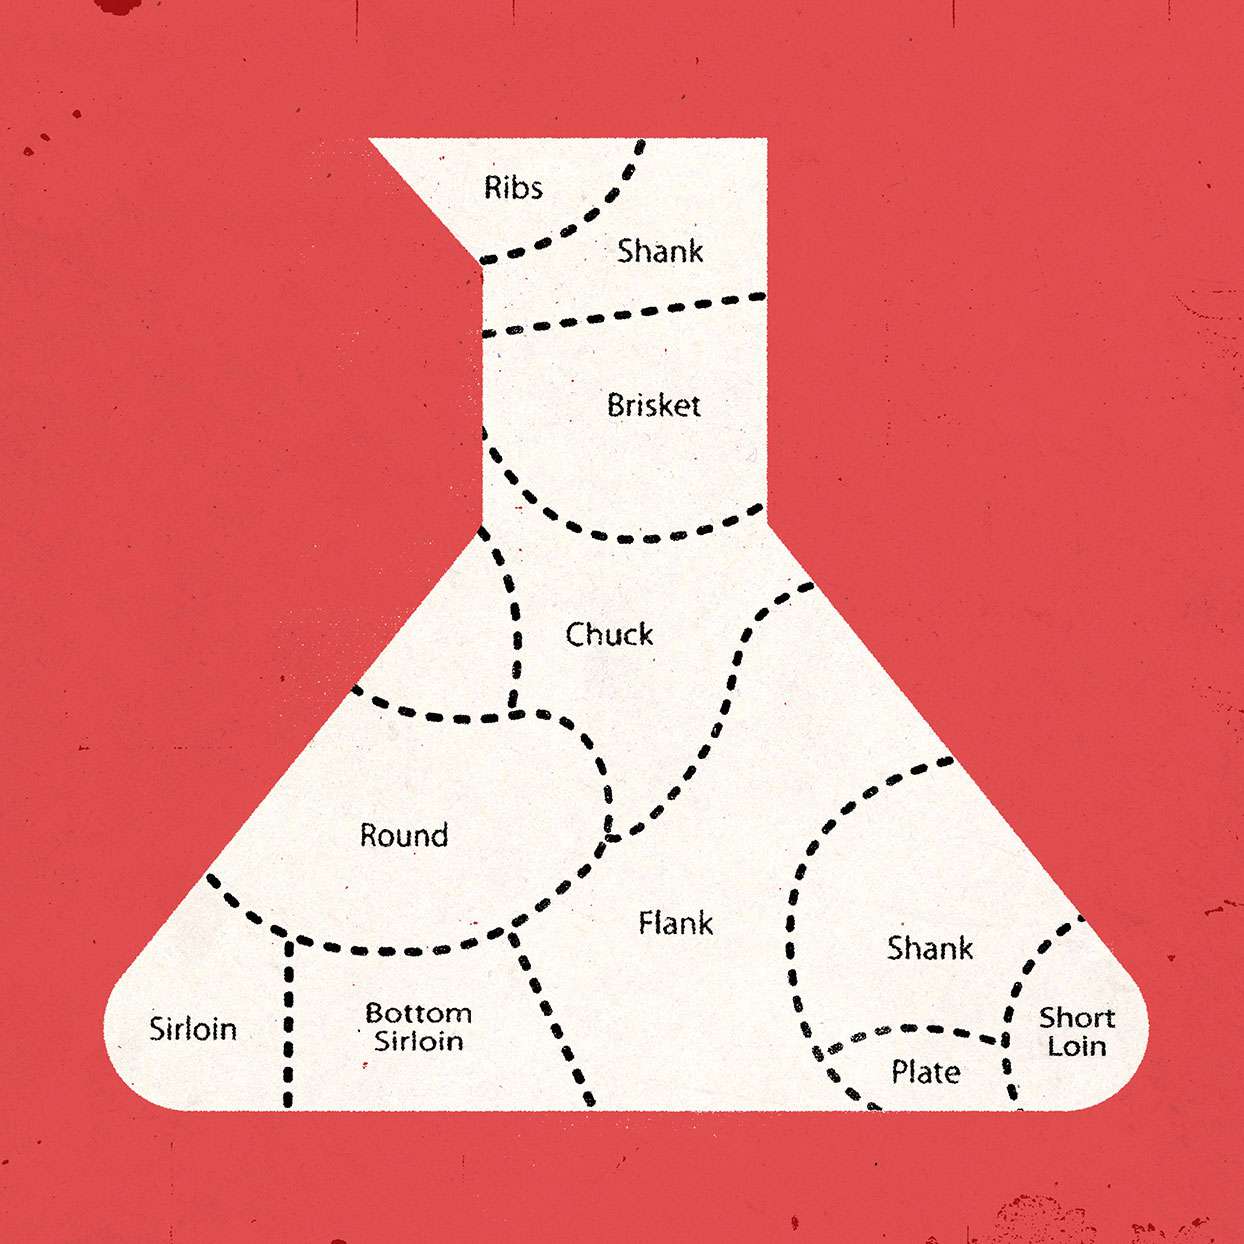 Illustration of a beaker shape with different cuts of meat words in designated areas within that shape